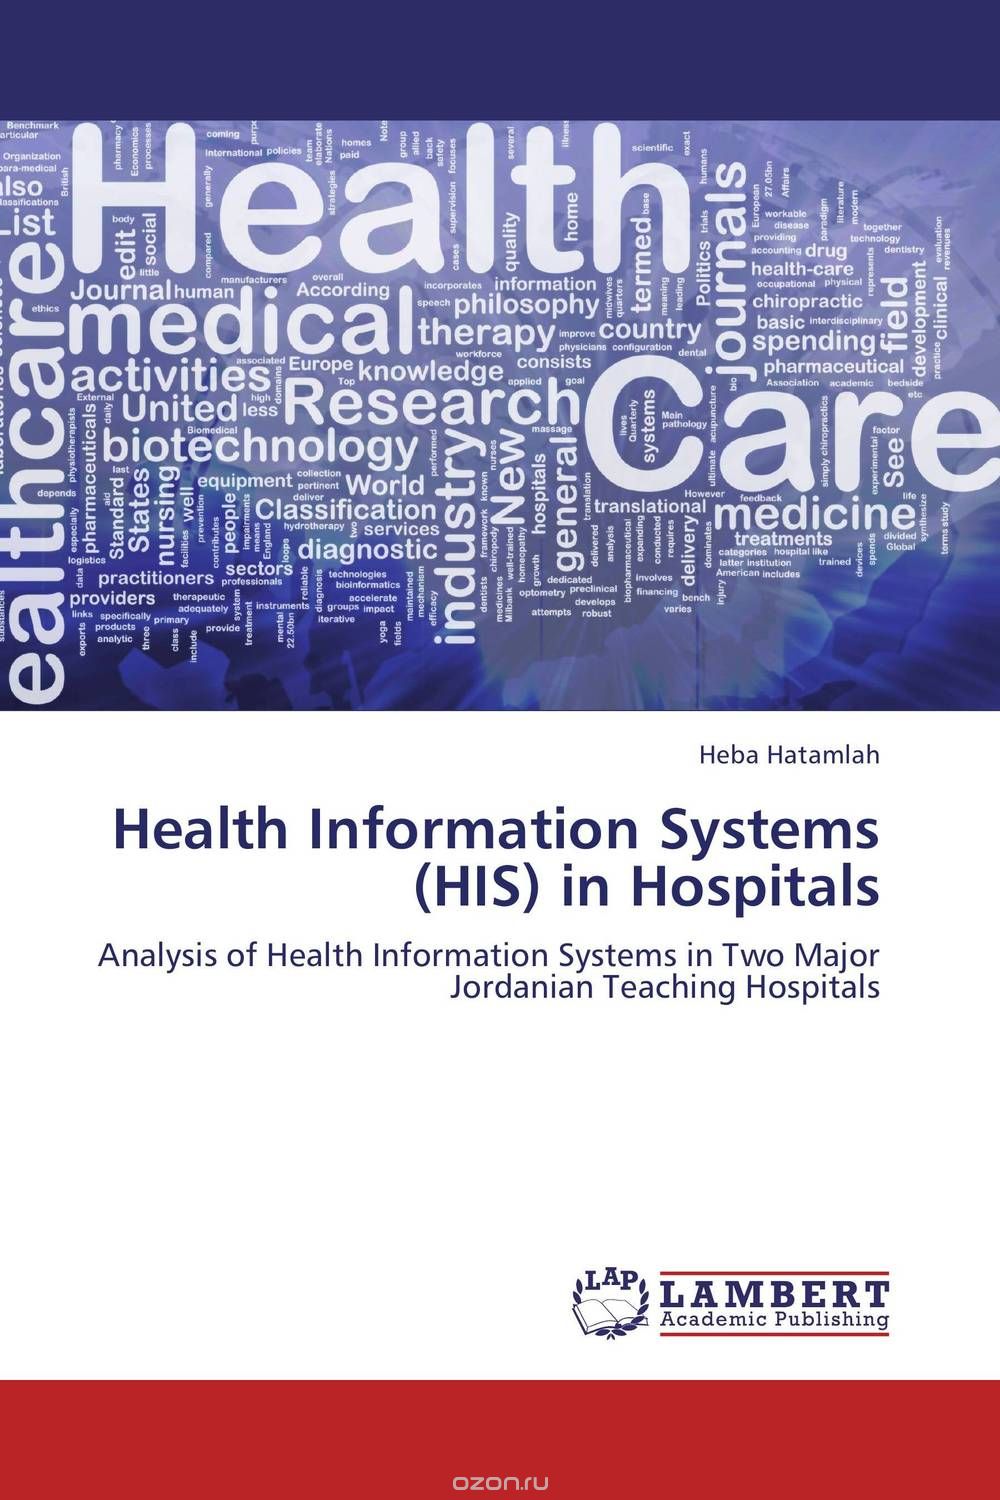 Health Information Systems (HIS) in Hospitals